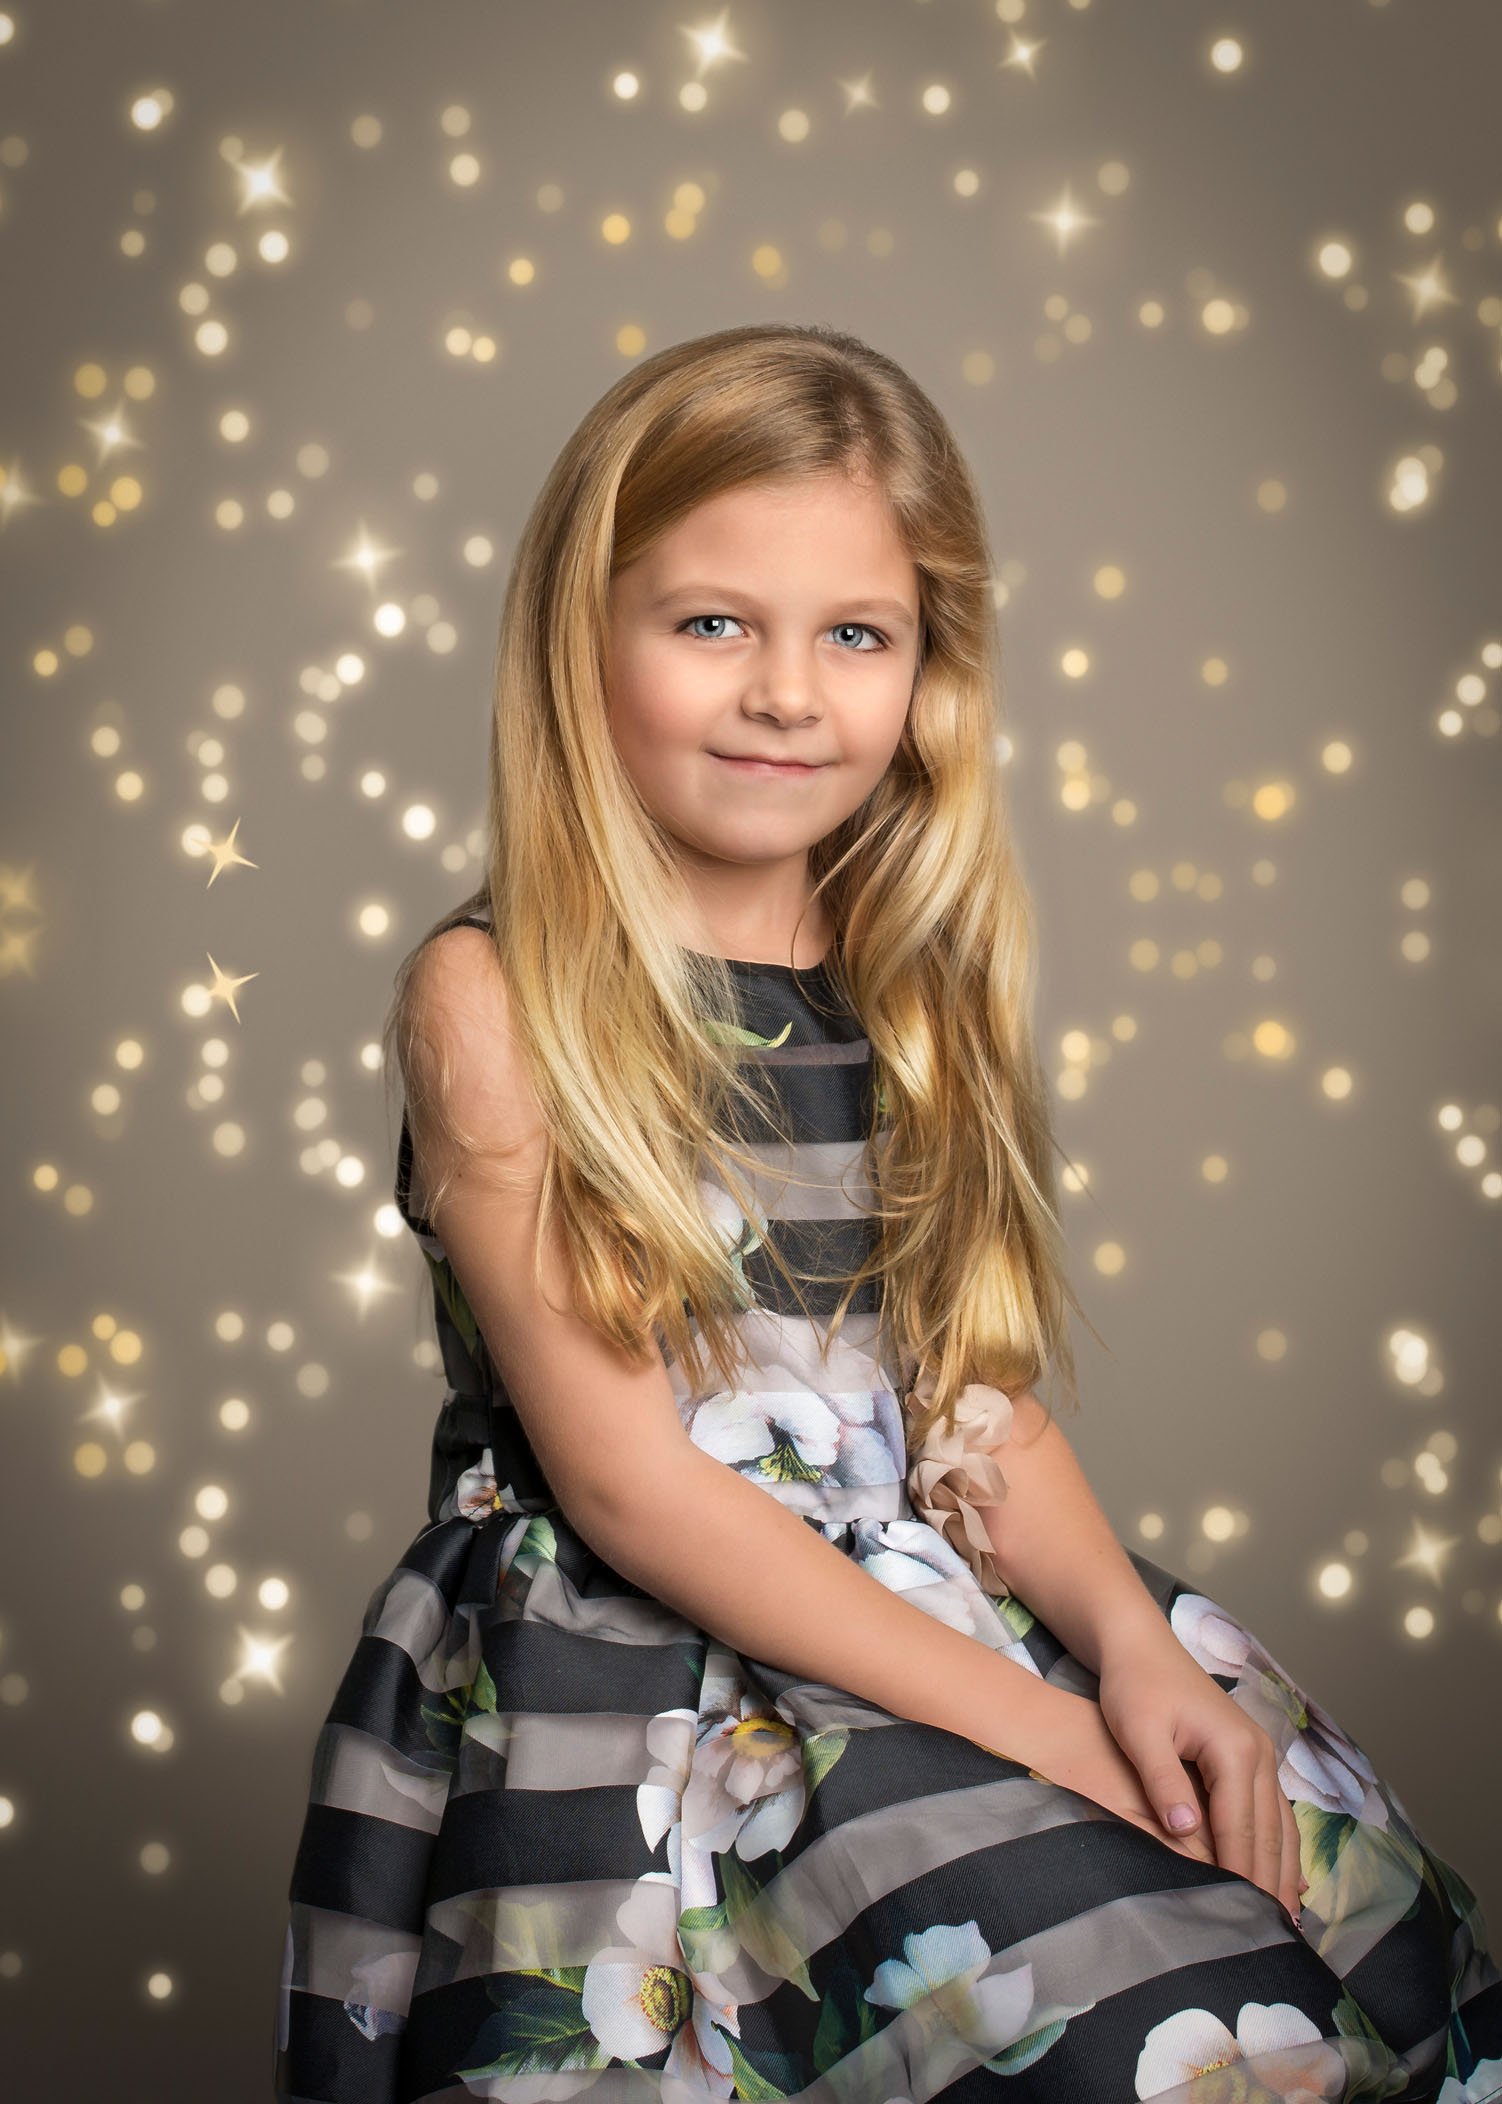 7 year old girl in pretty dress with bokeh lights